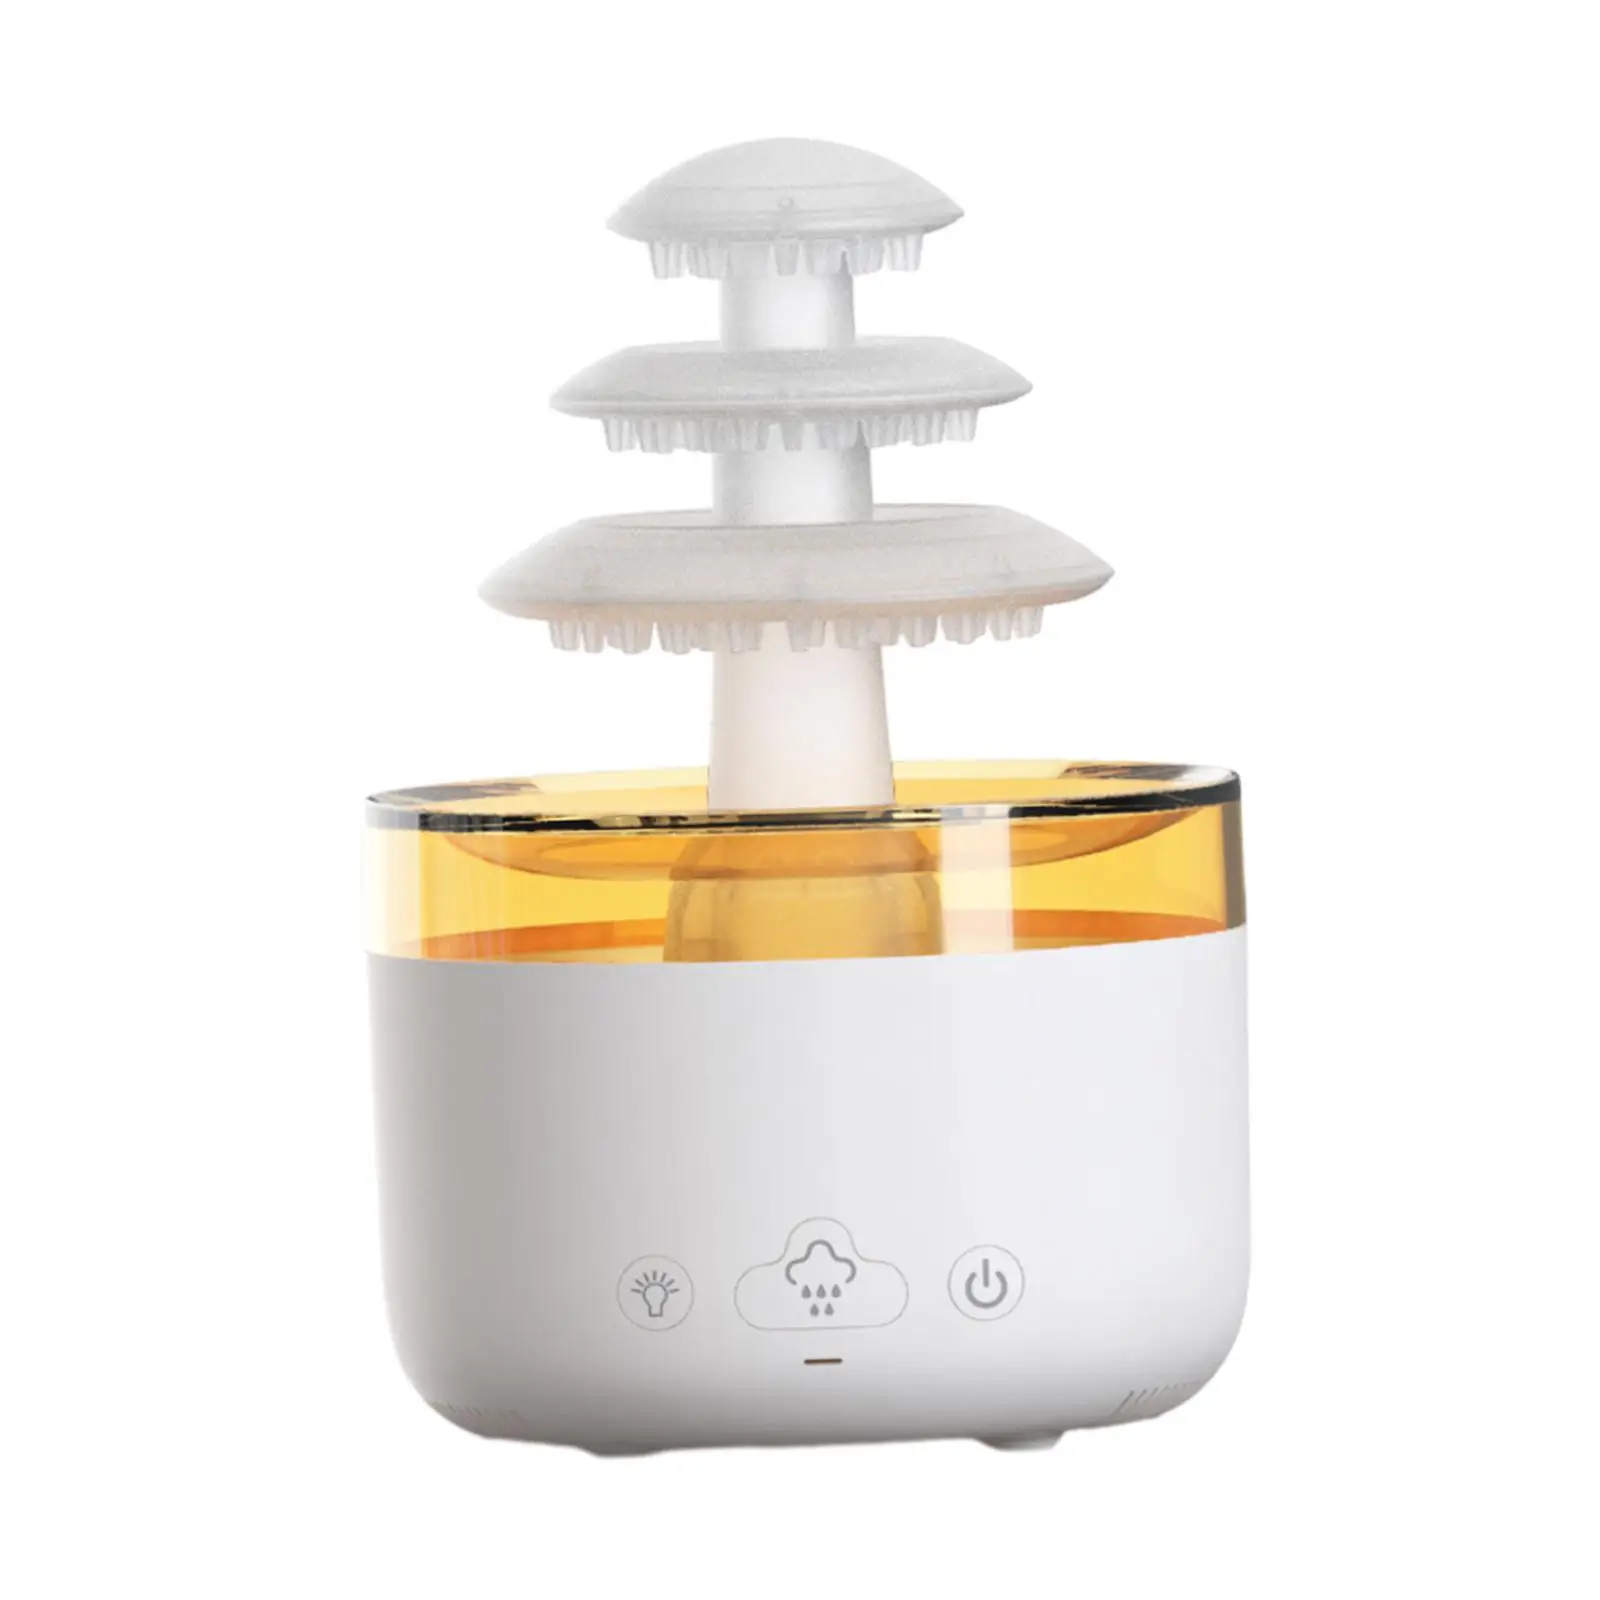 Essential Oil Diffuser Premium Portable Decoration Air Humidifier Mist Diffuser for Office Bedroom Pet Room Large Room Study